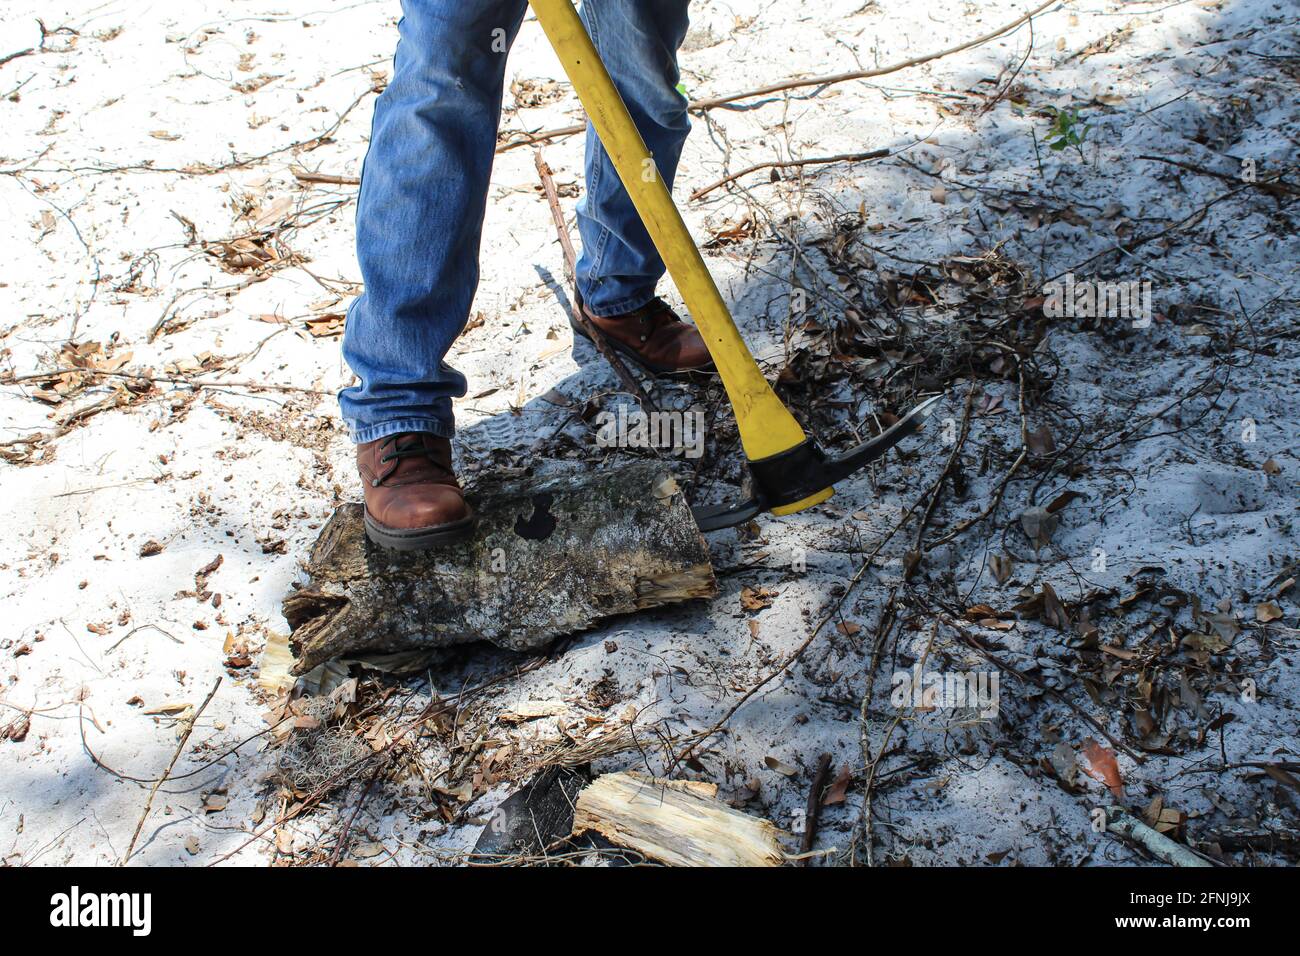 Industrial Railroad Pick-axe being used by a man to break a piece of wood on the floor.  Pick axe Stock Photo